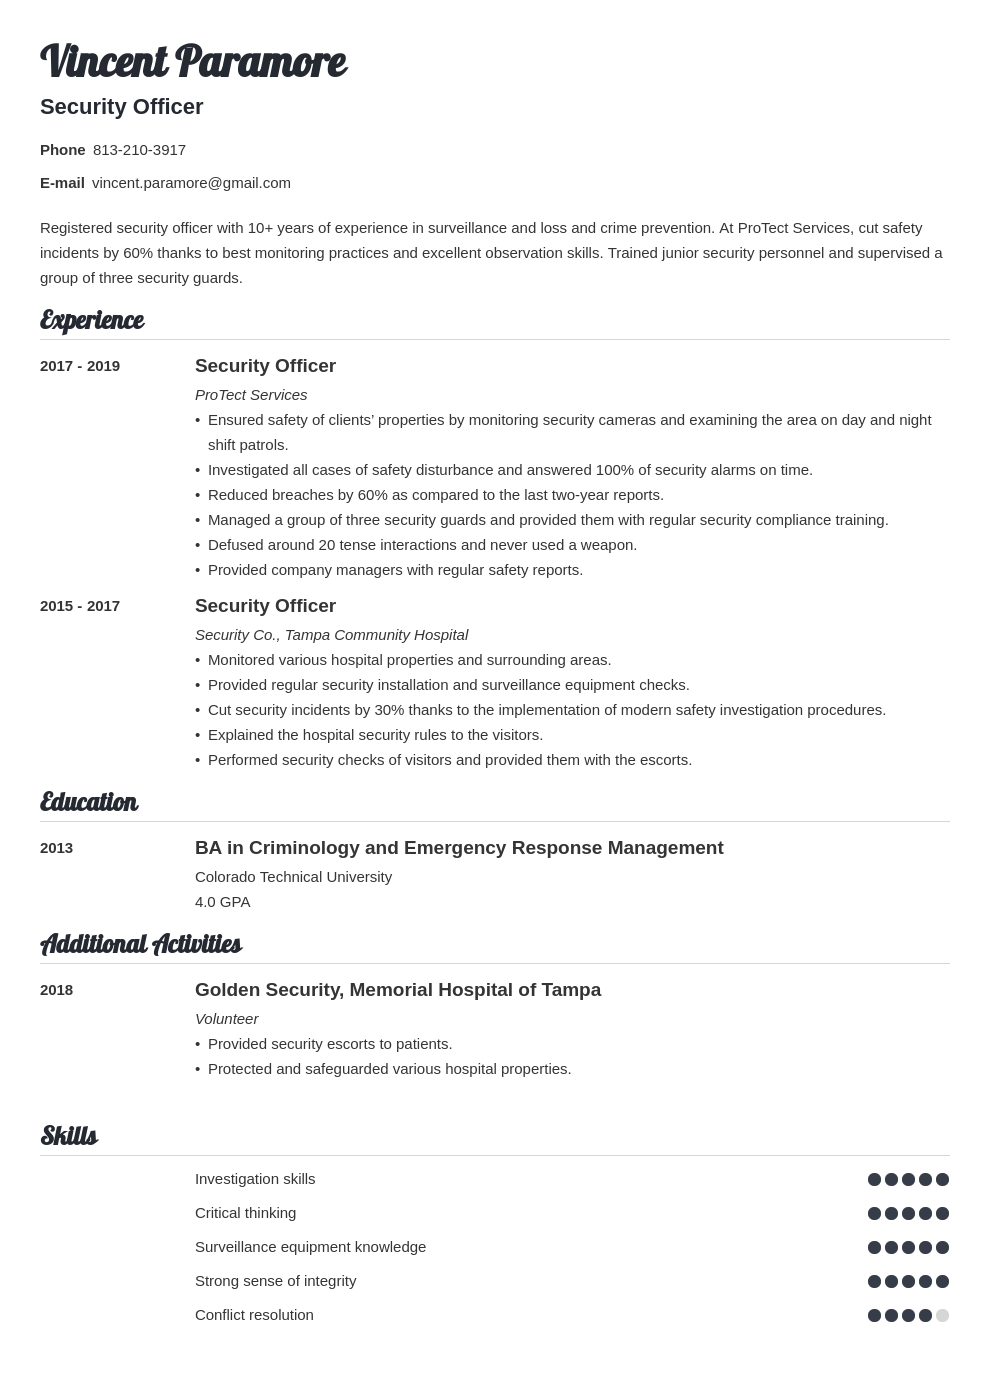 Security Officer Resume Sample & Guide (Any Experience)